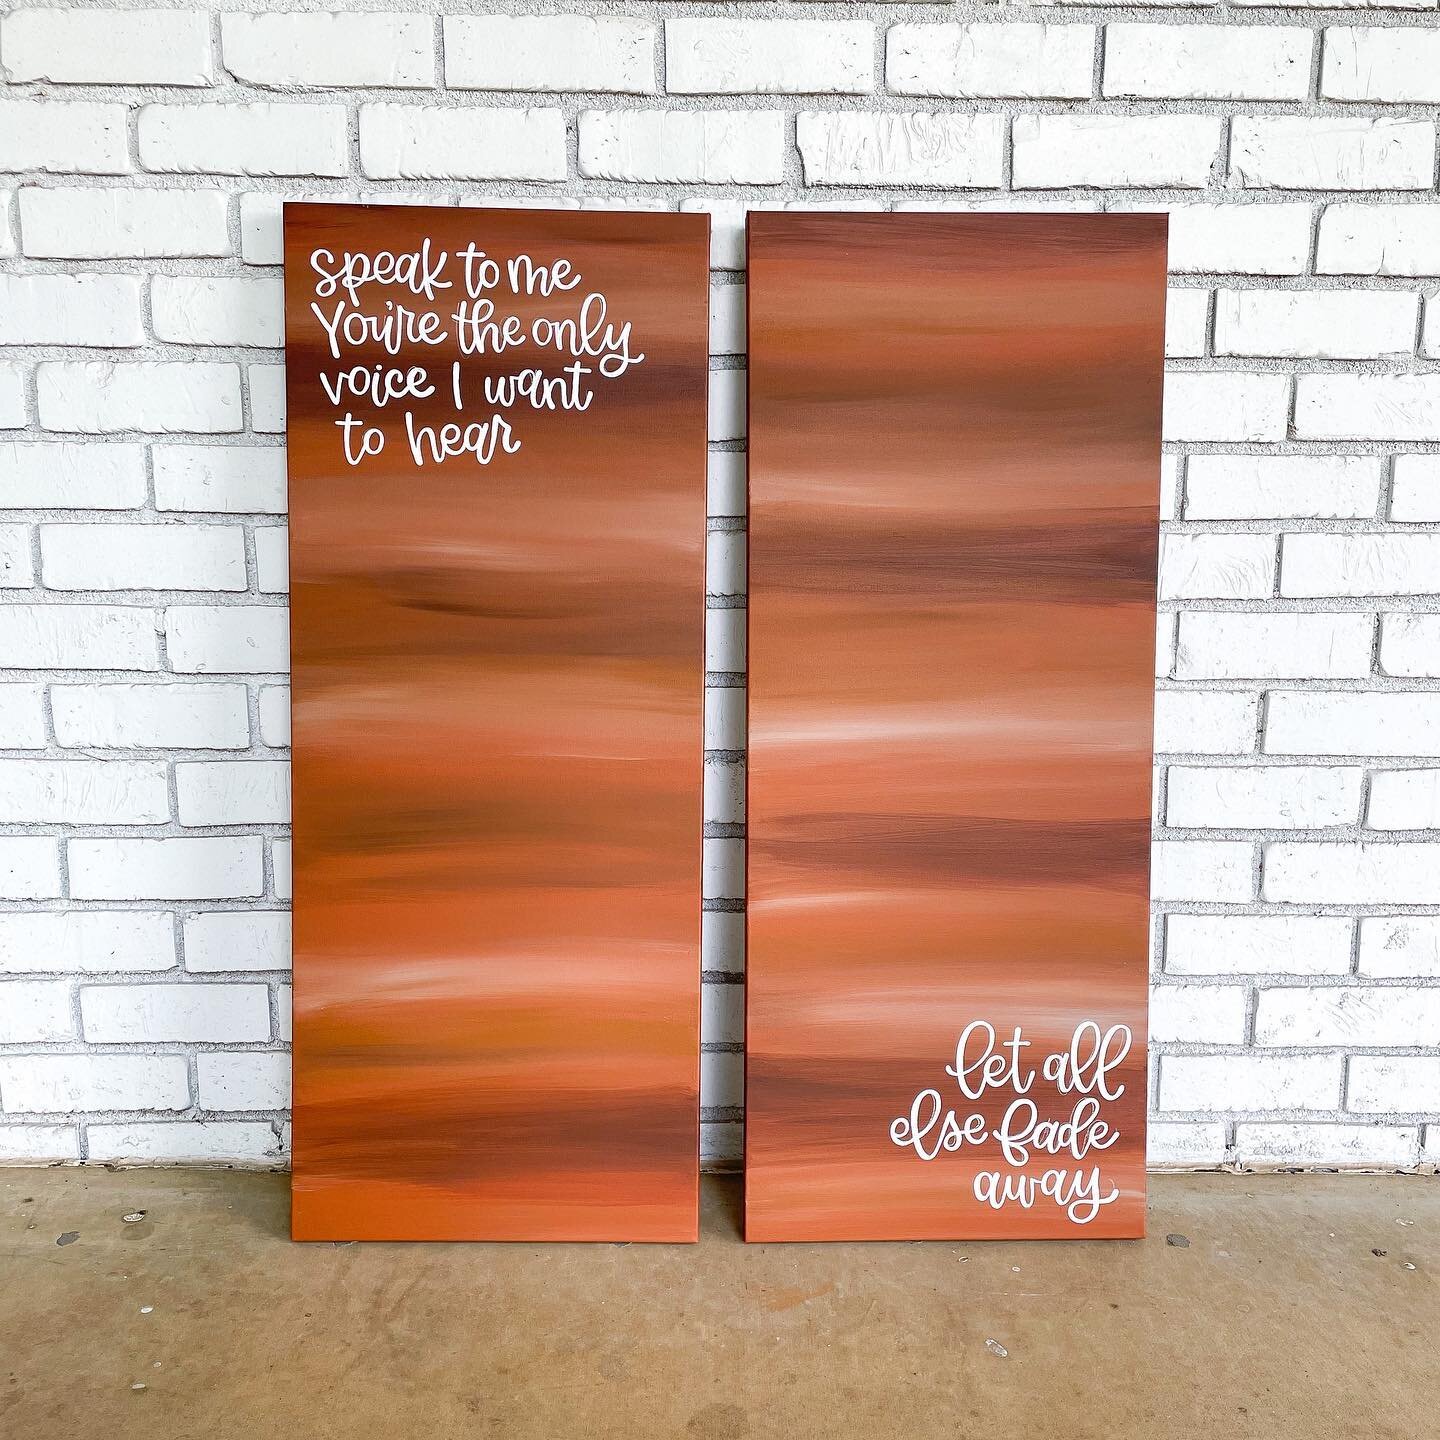 I got to paint these two 16x40 custom canvases for a master bedroom a month ago. I love the simplicity of them!

Message or email me if you want to update your space in a unique way. 😊